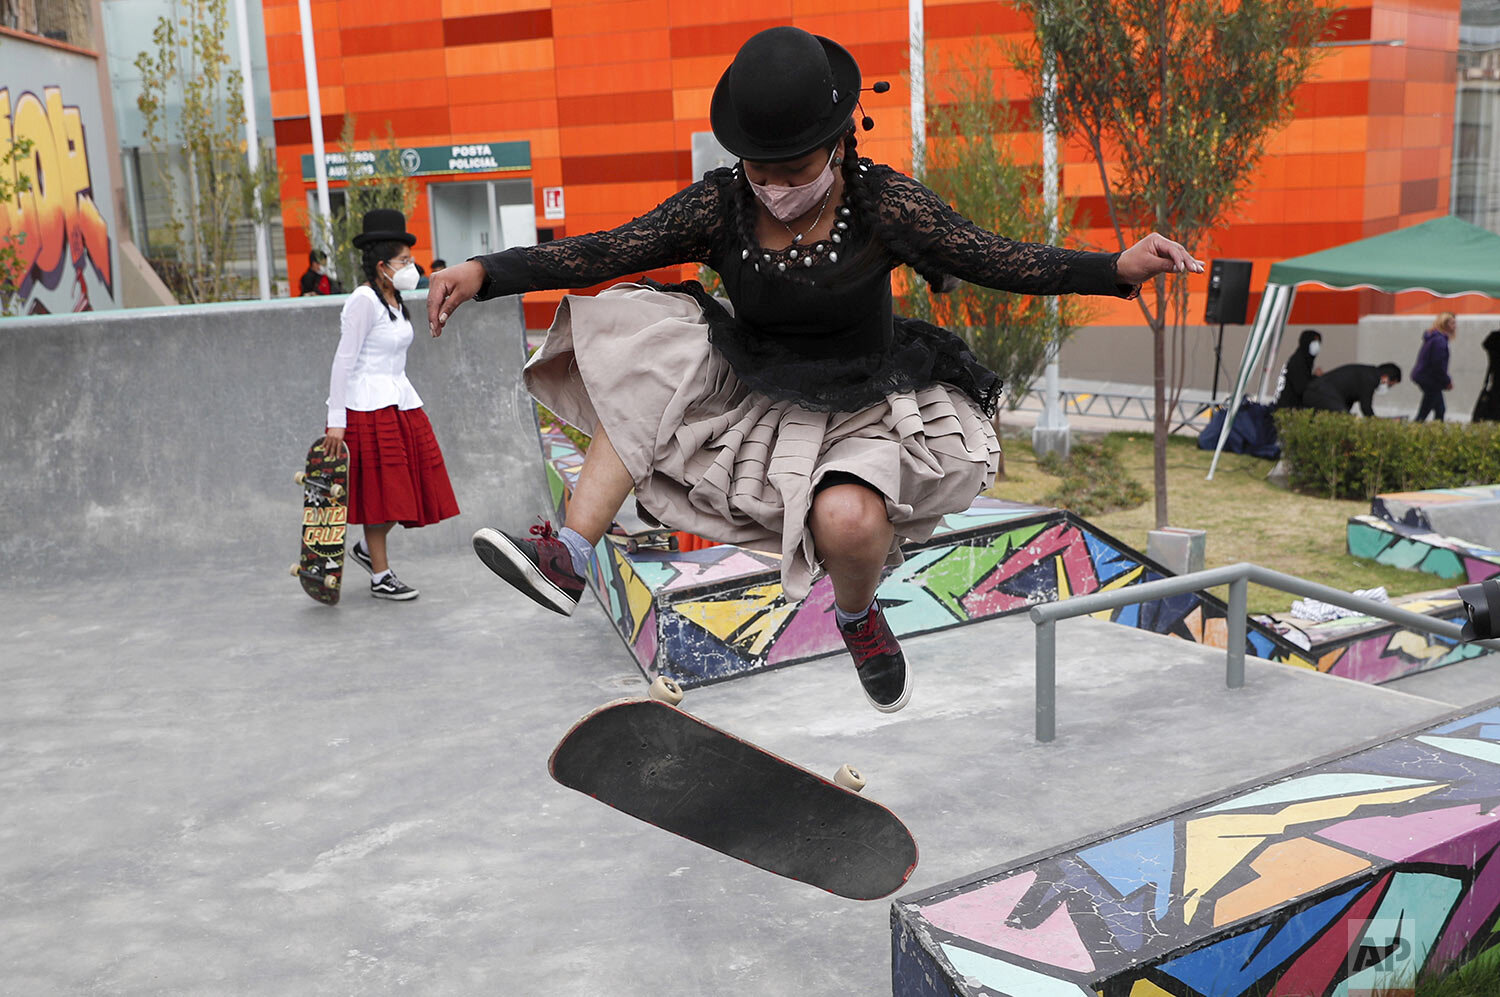  Aide Choque jumps her skateboard during a youth talent show in La Paz, Bolivia, Sept. 30, 2020. The girls of the collective “ImillaSkate,” a mixture of Aymara and English meaning girl and skateboarding, wear the Indigenous dress of their grandmother